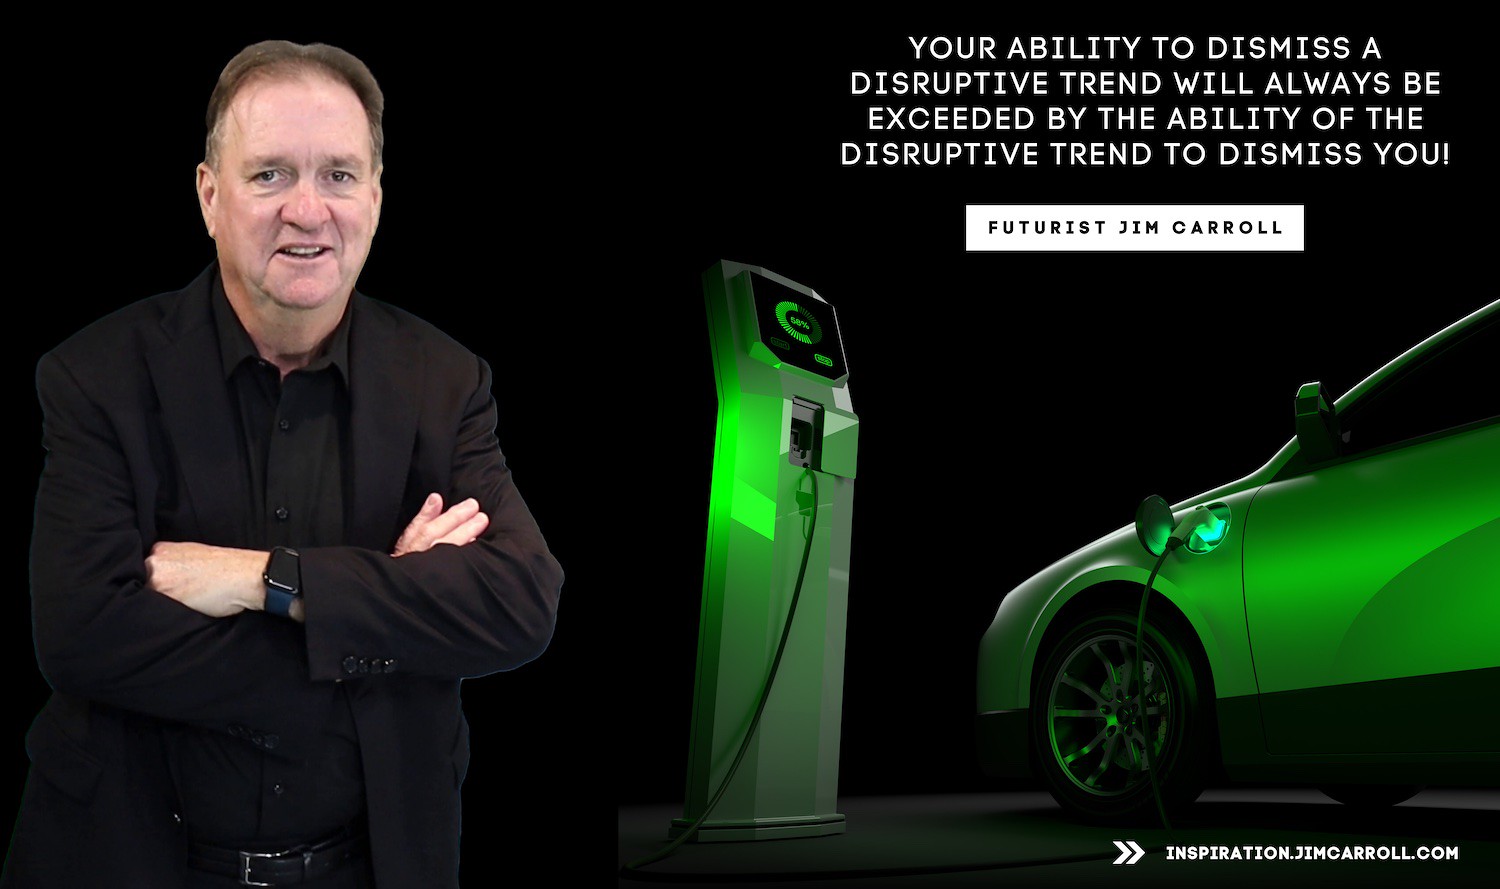 "Your ability to dismiss a disruptive trend will always be exceeded by the ability of the disruptive trend to dismiss you!" - Futurist Jim Carroll